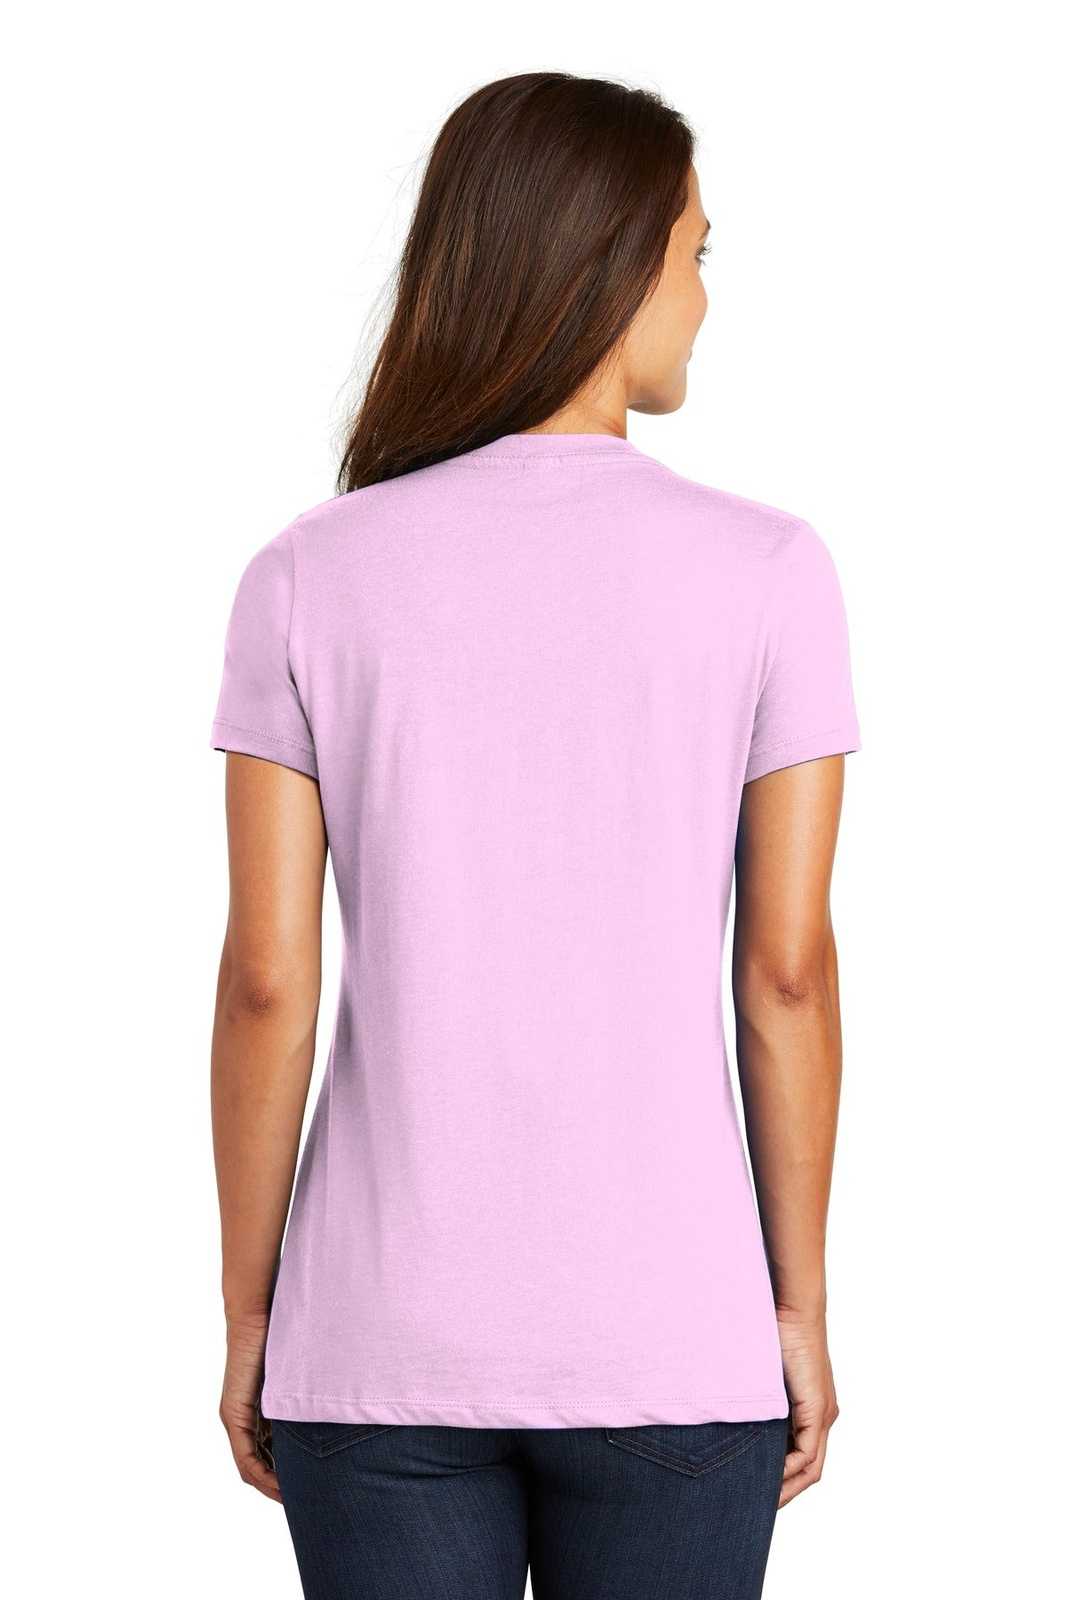 District DM1170L Women's Perfect Weight V-Neck Tee - Soft Purple - HIT a Double - 1